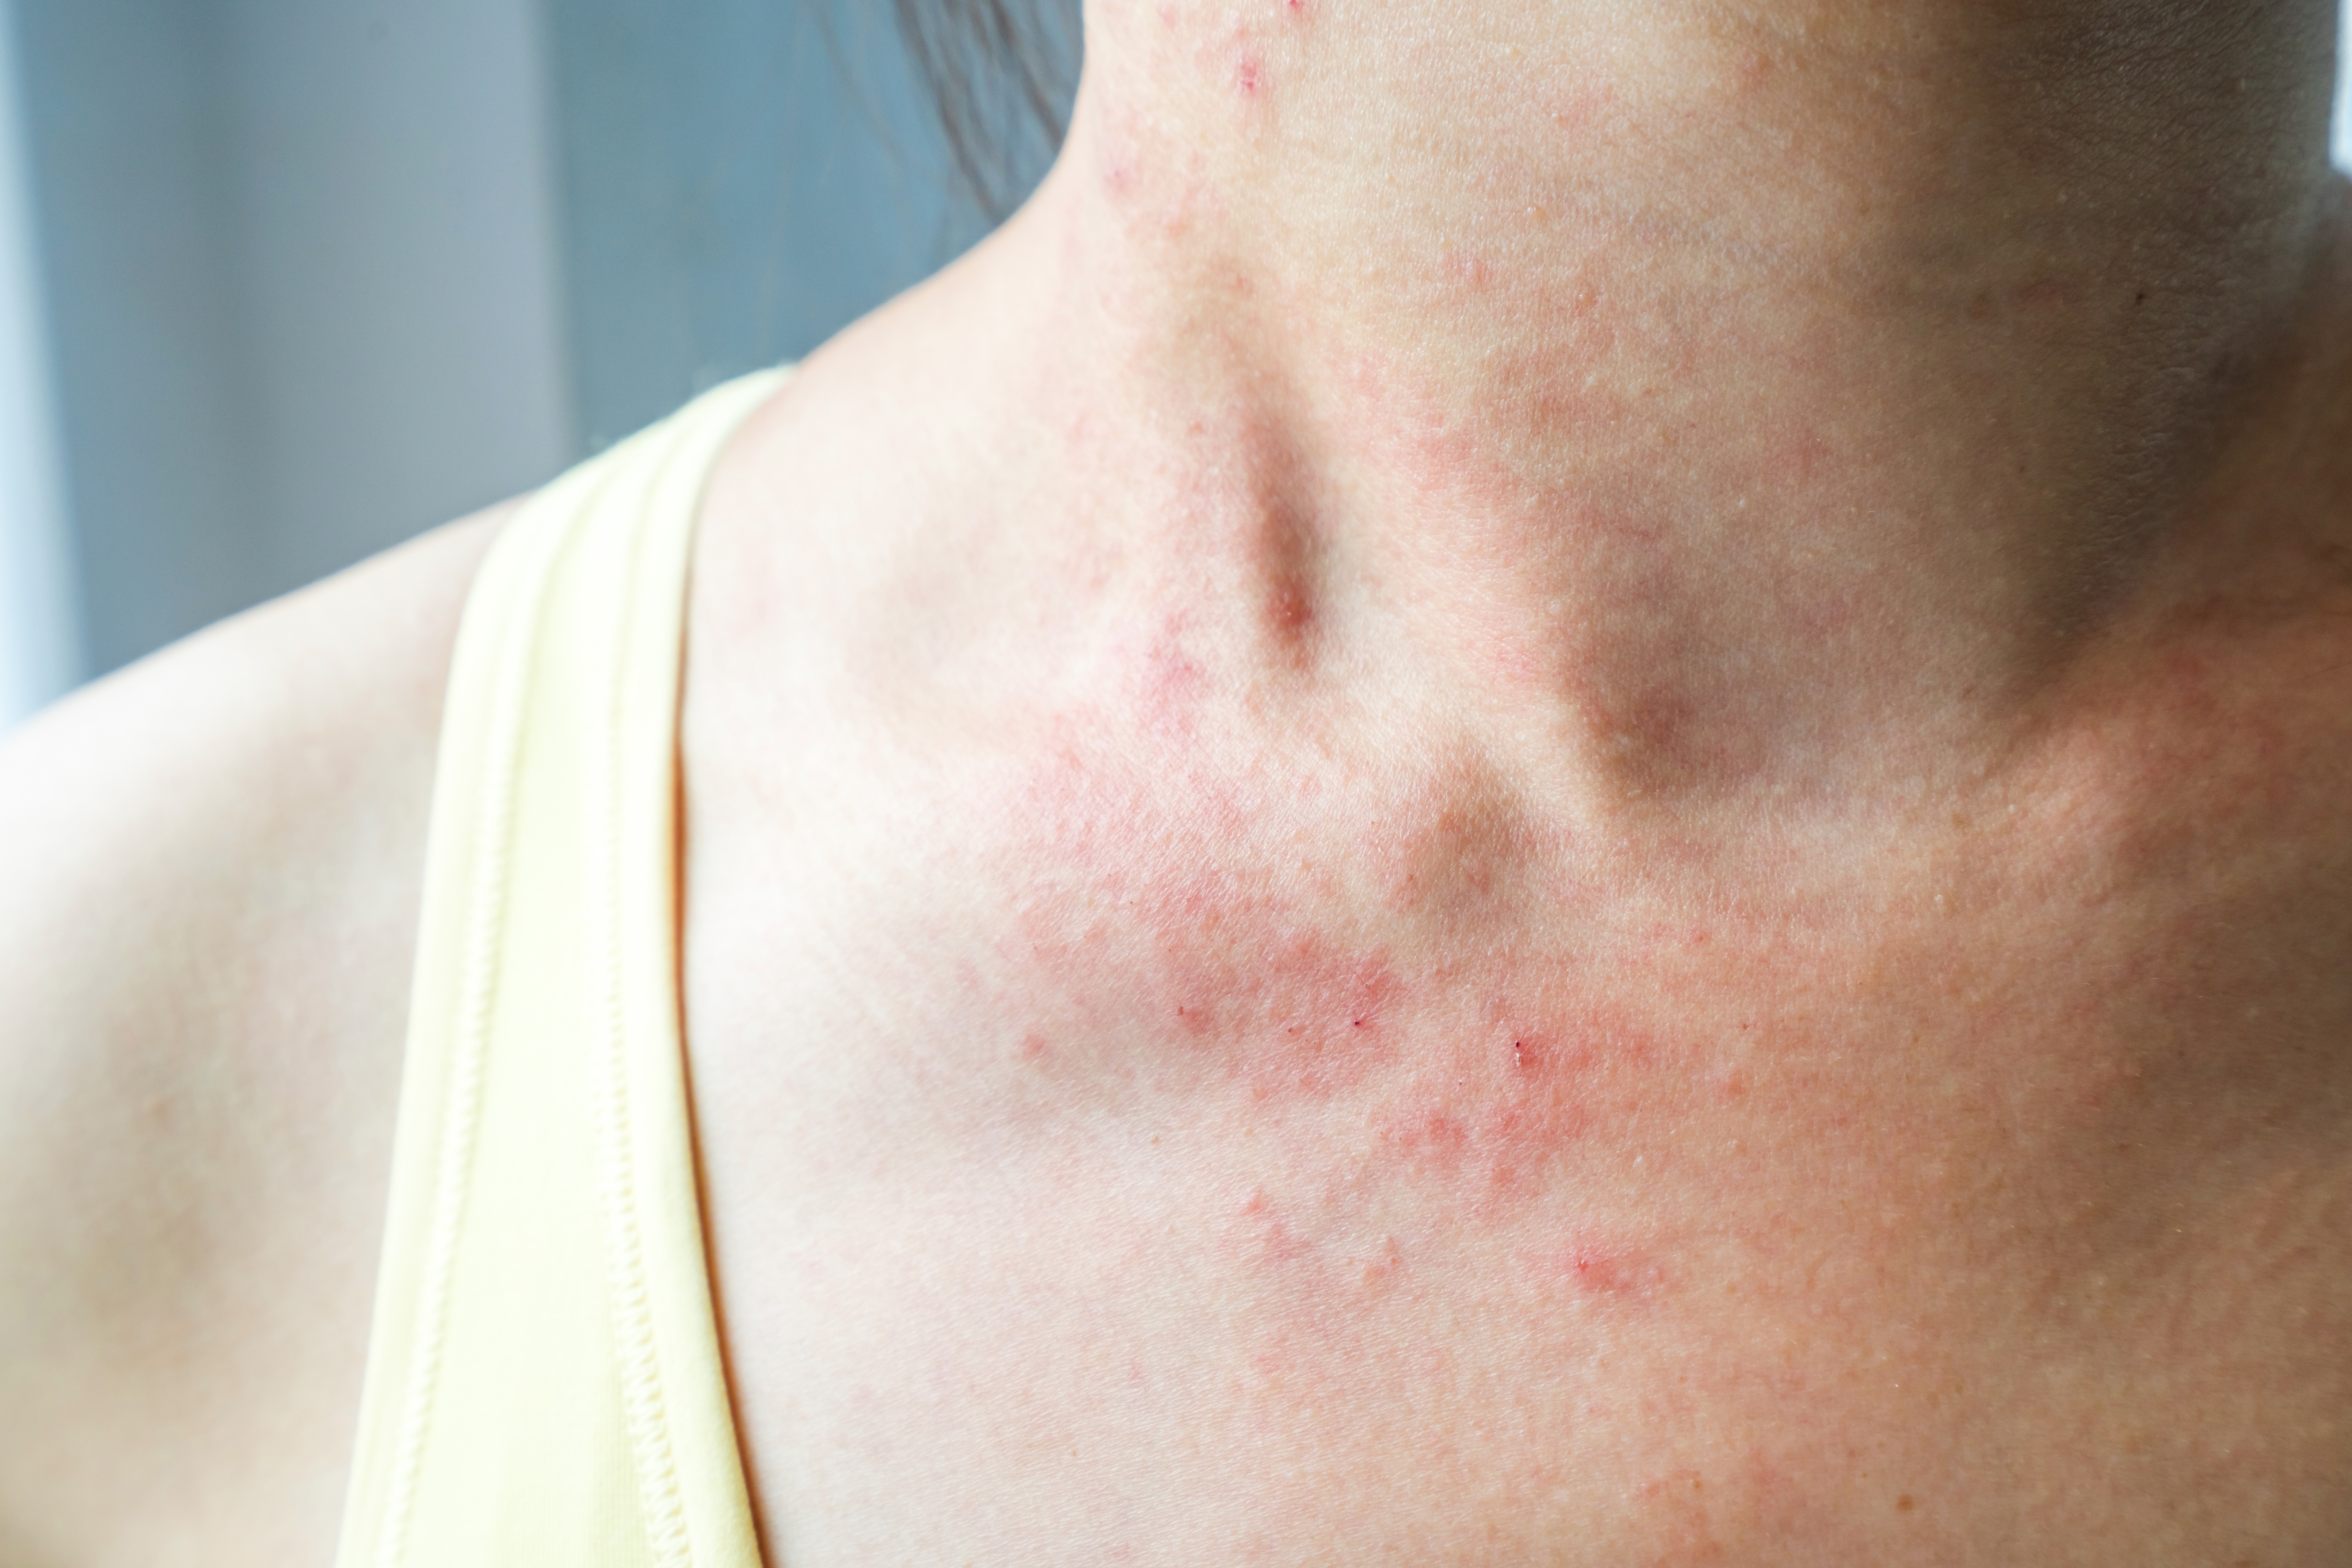 Breast Rash: Meaning, Causes, Symptoms & Treatment